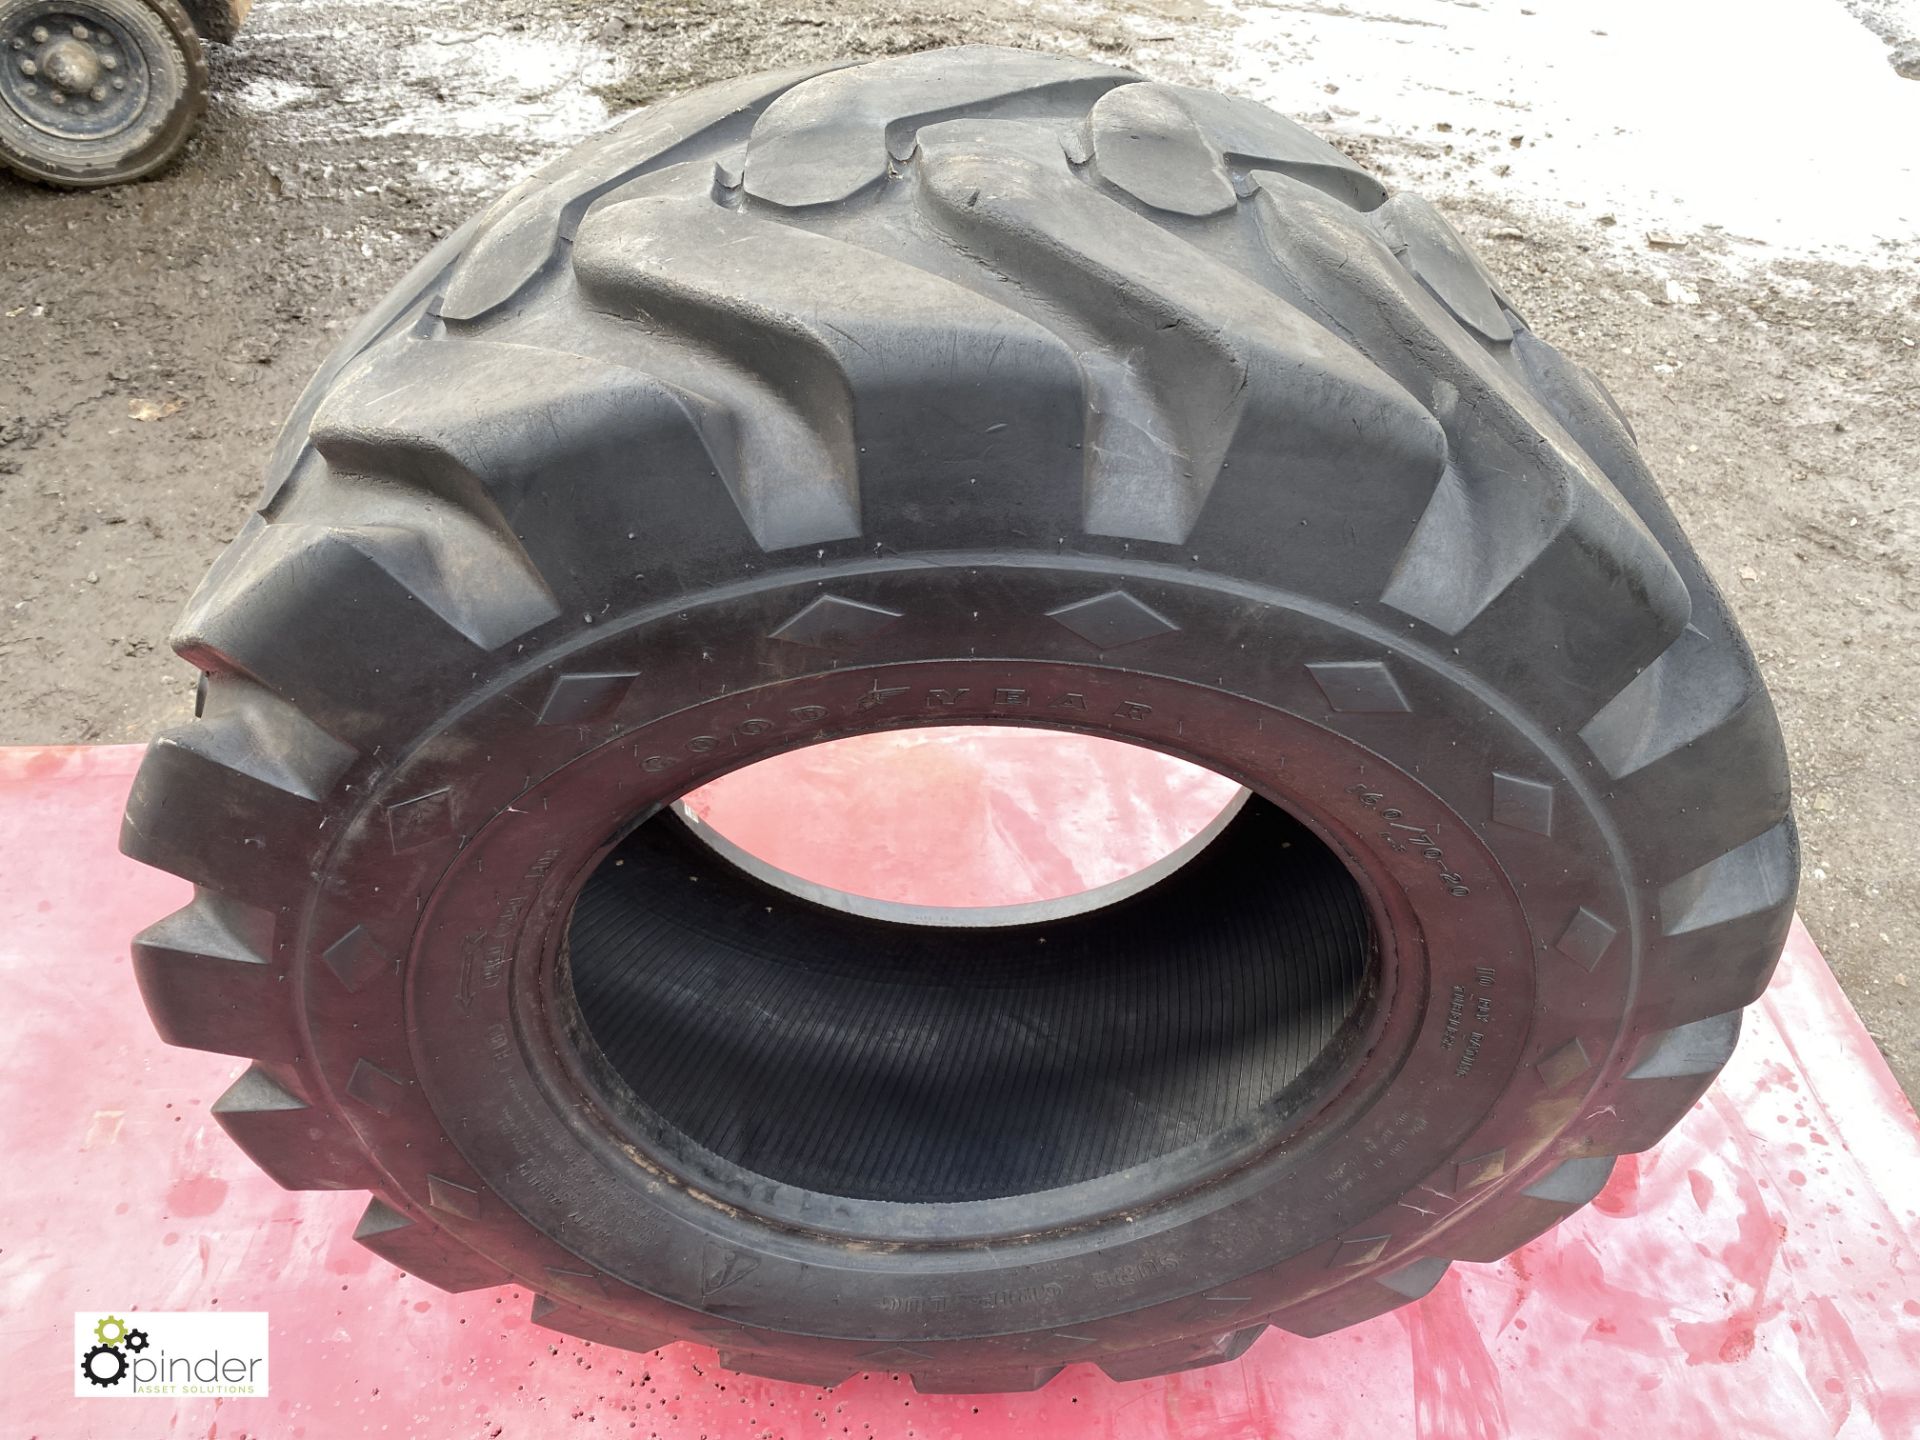 Goodyear Gym Training Tyre, 16.0/70-20 - Image 2 of 3